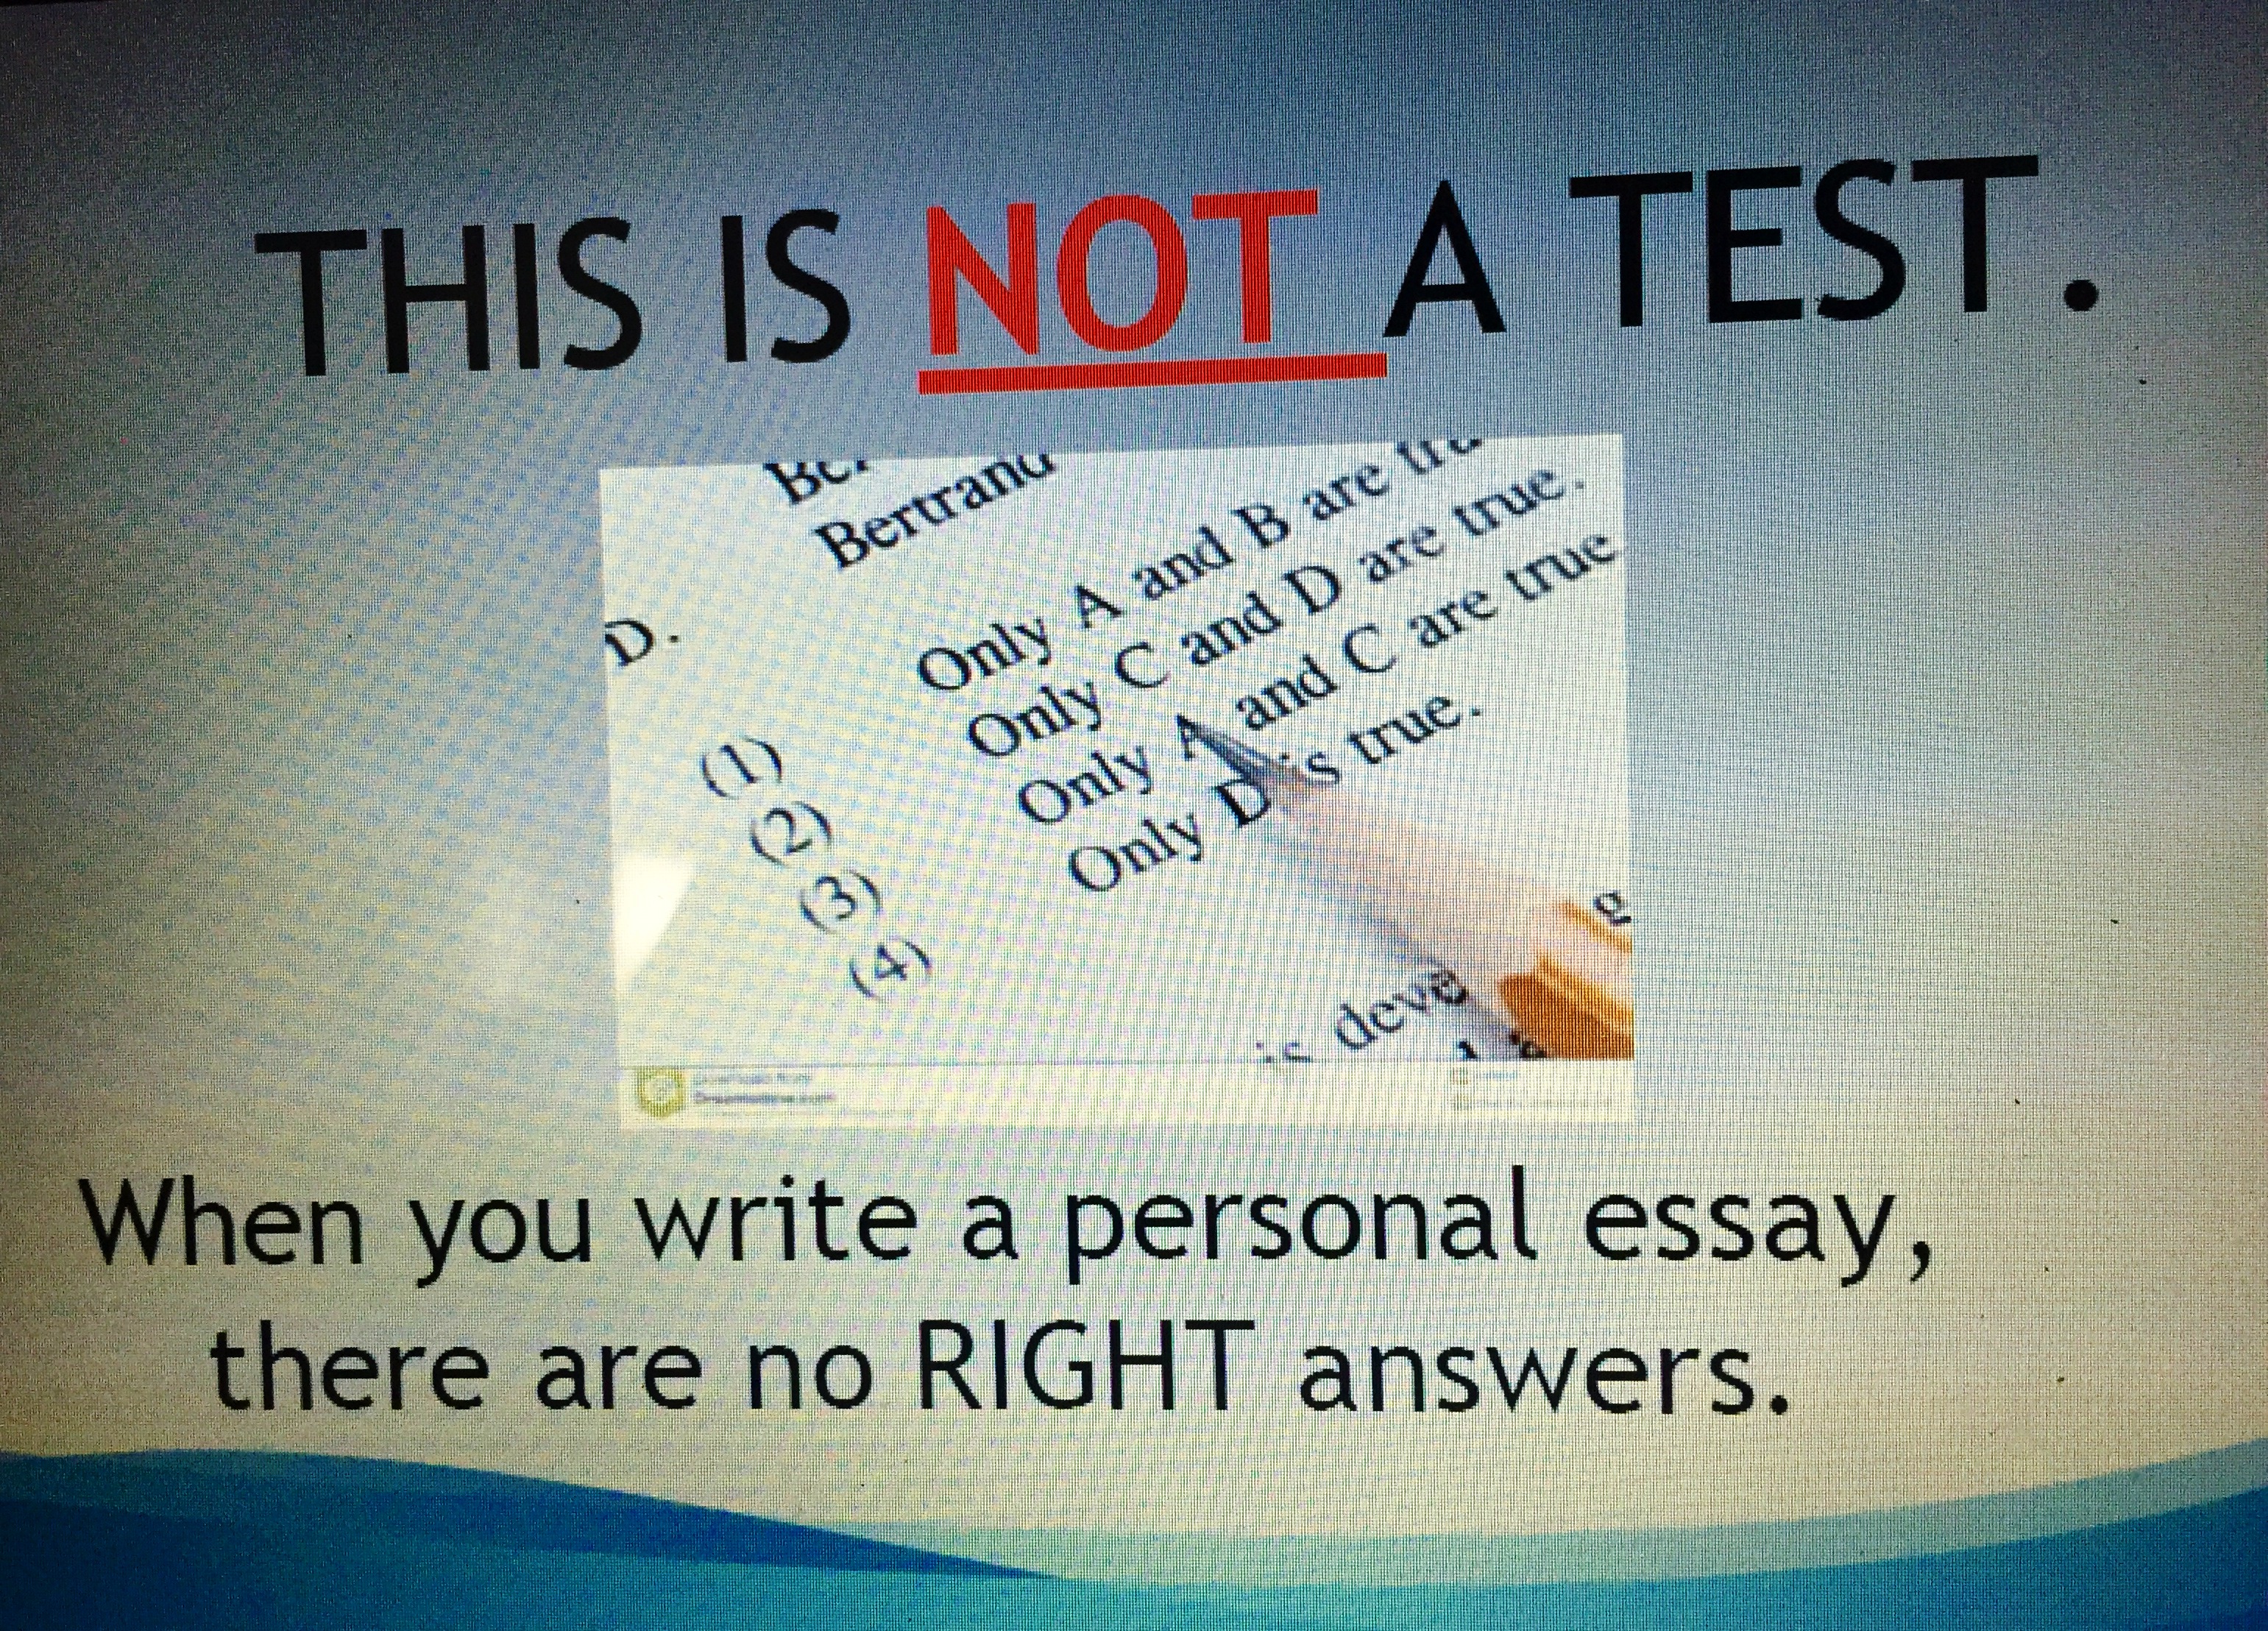 This Is Not a Test.jpg